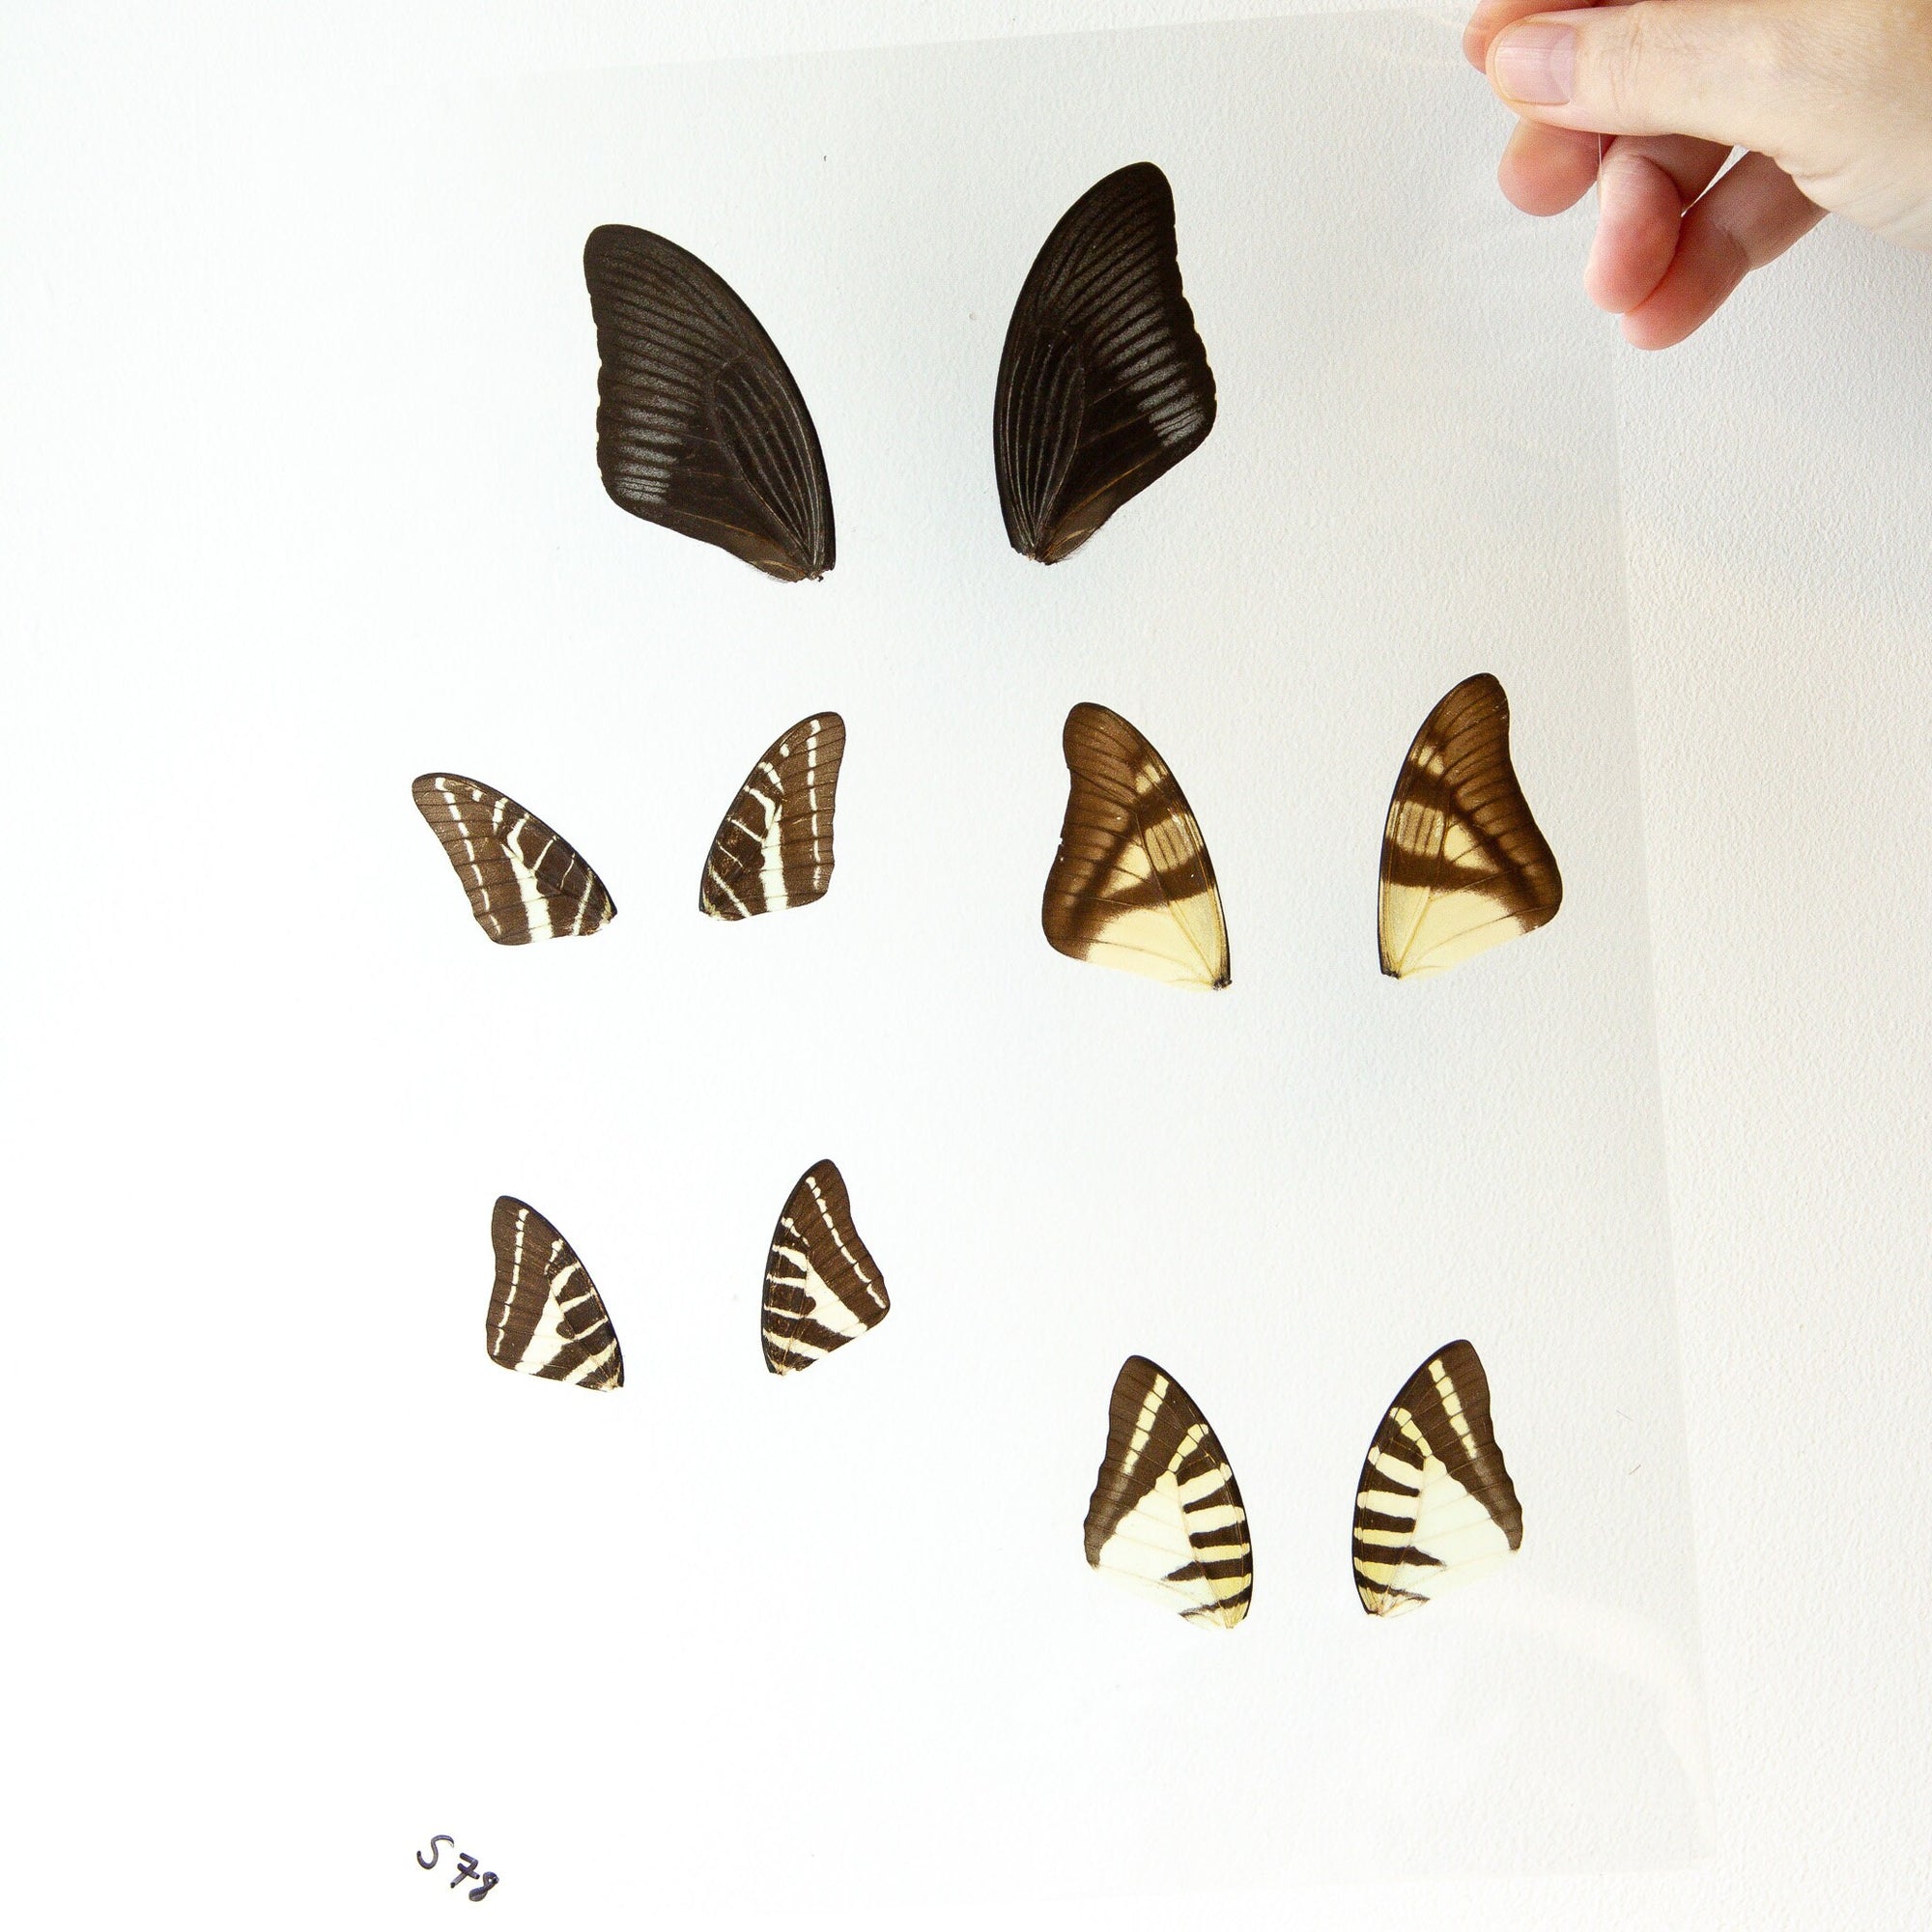 Butterfly Wings GLOSSY LAMINATED SHEET Real Ethically Sourced Specimens Moths Butterflies Wings for Art -- S78